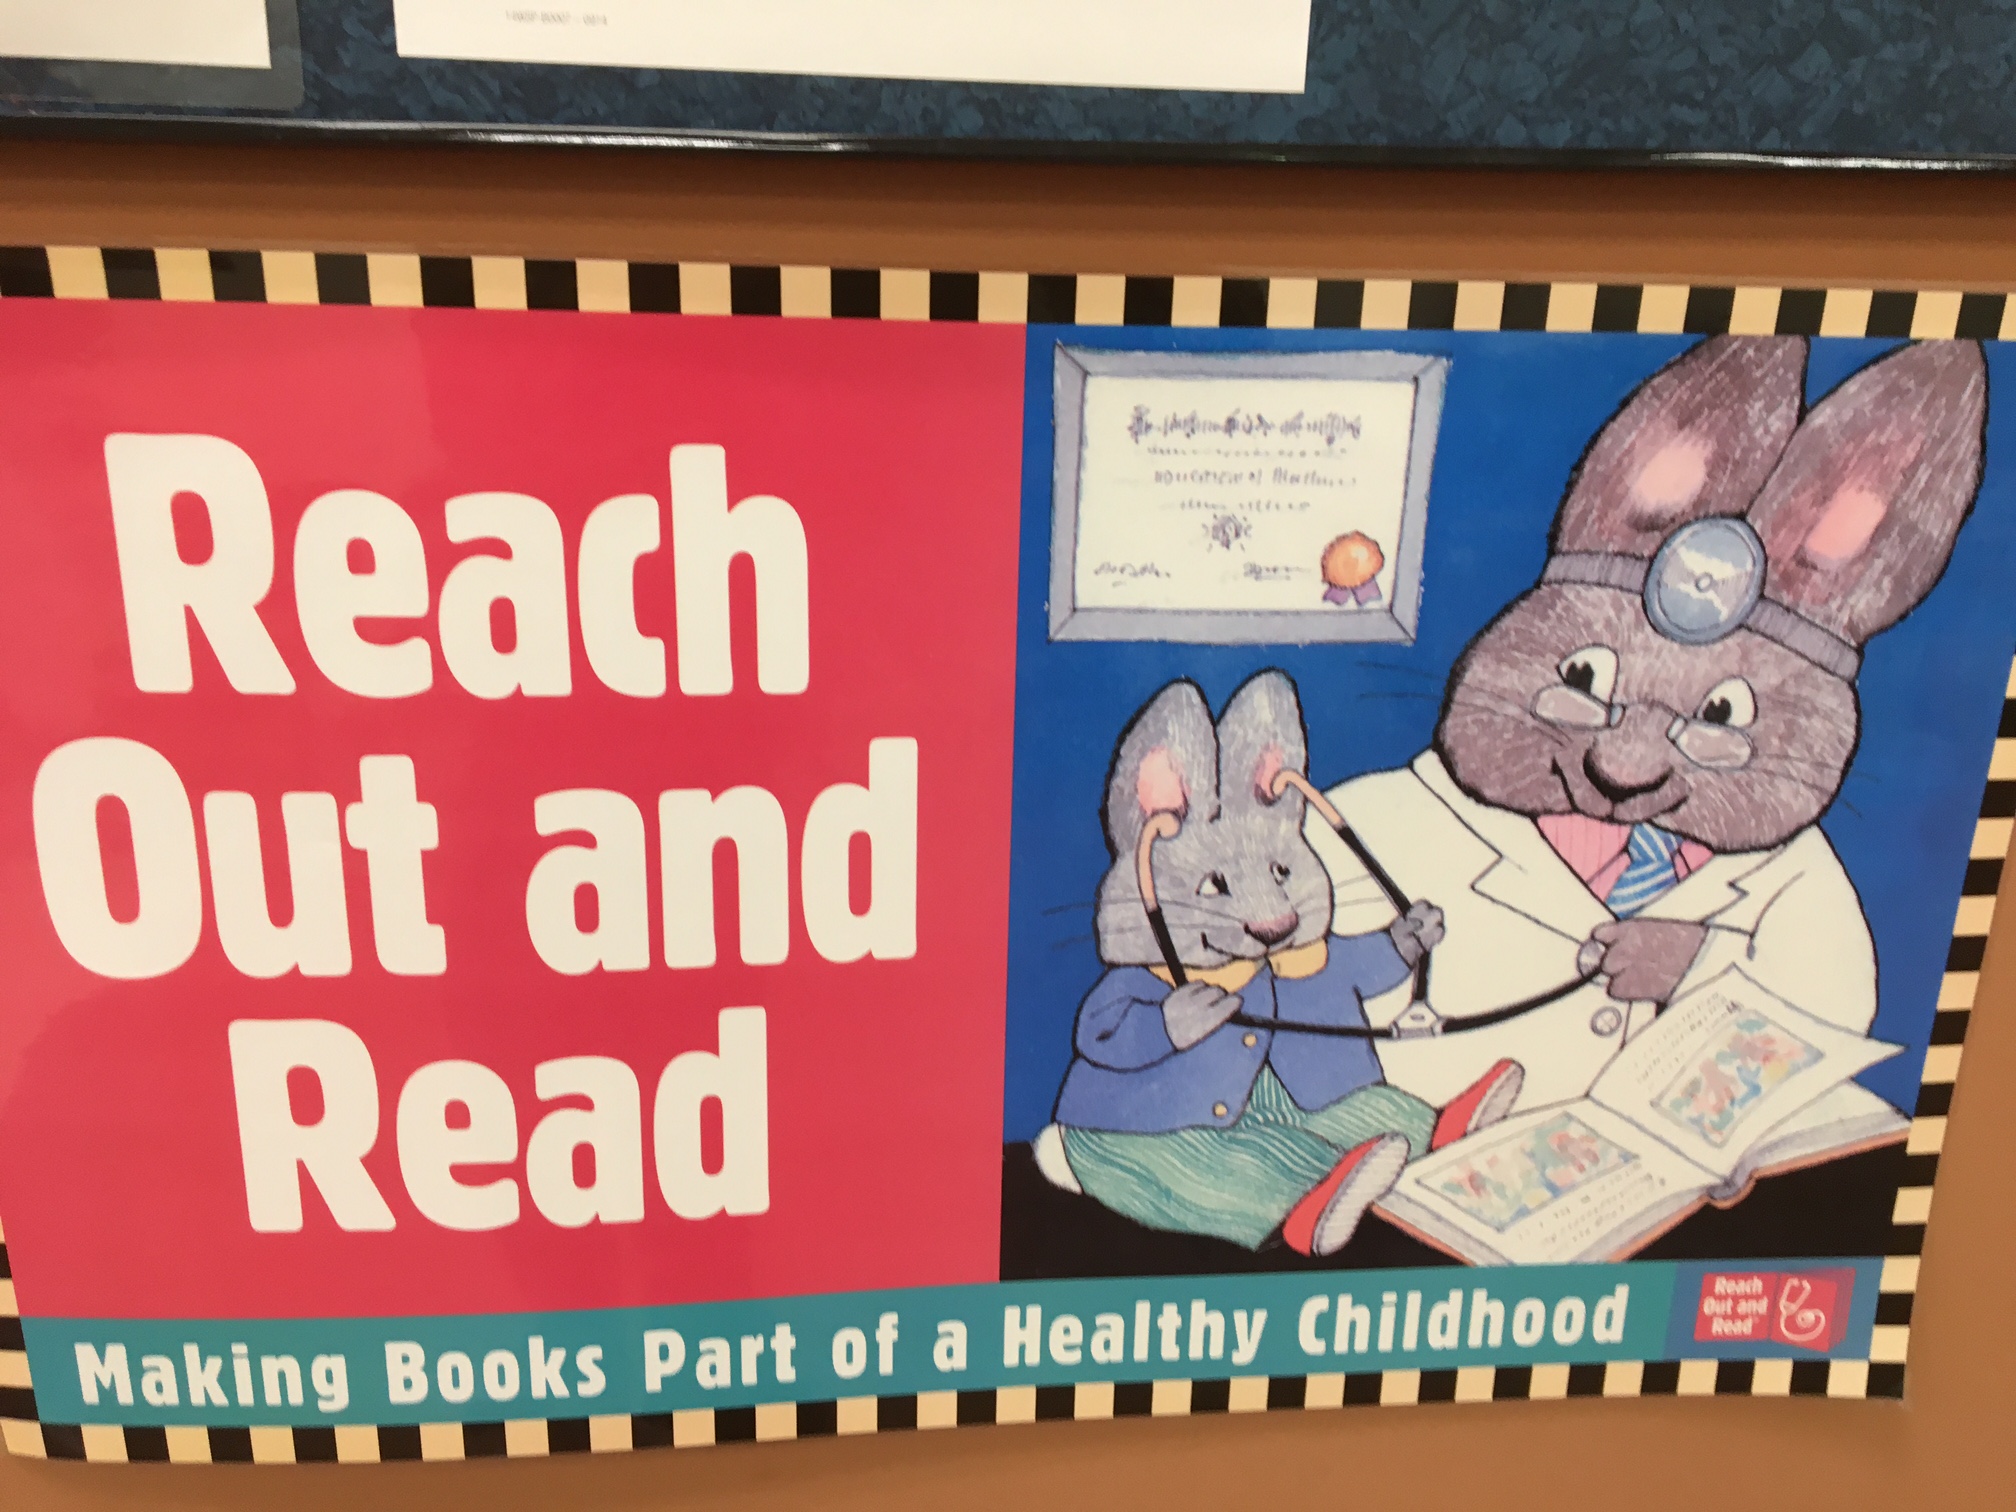 COMMUNITY HEALTH CENTER’S “REACH OUT AND READ” PROGRAM NEEDS YOUR EXTRA BOOKS!